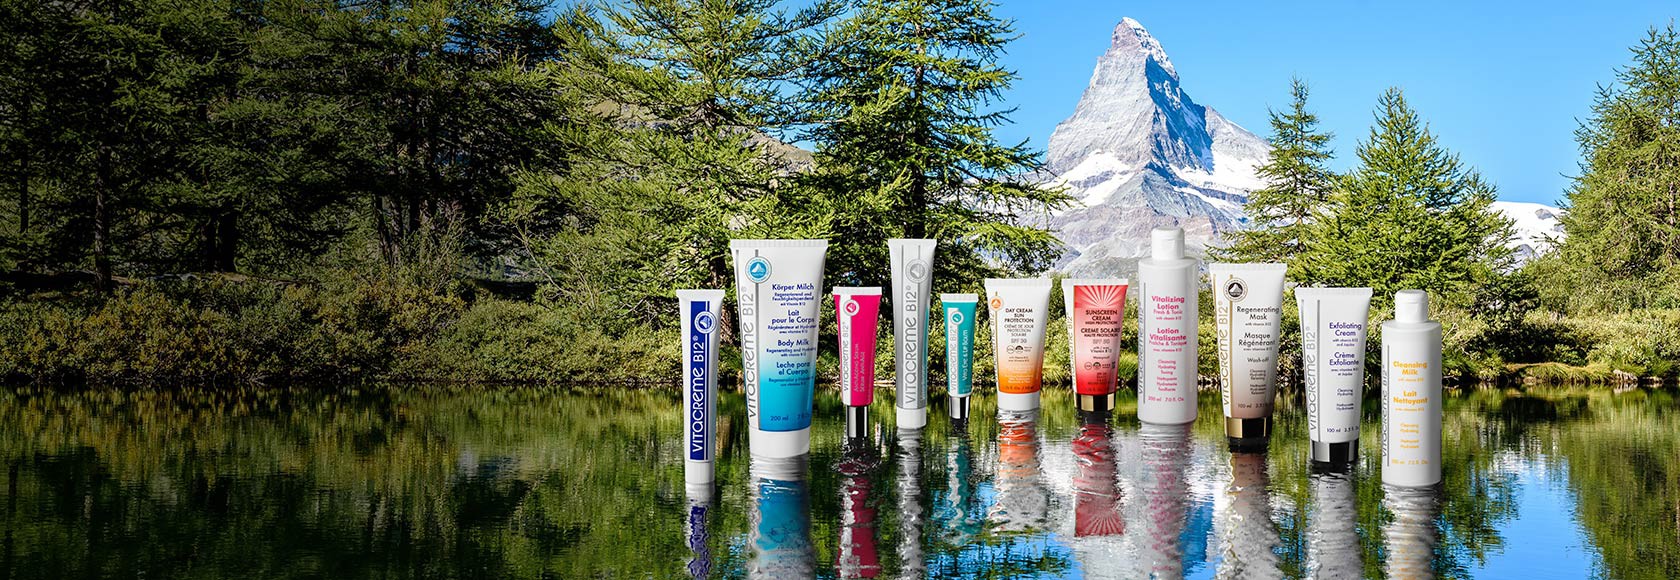 The first vitamin B12 skincare range, designed and made in Switzerland